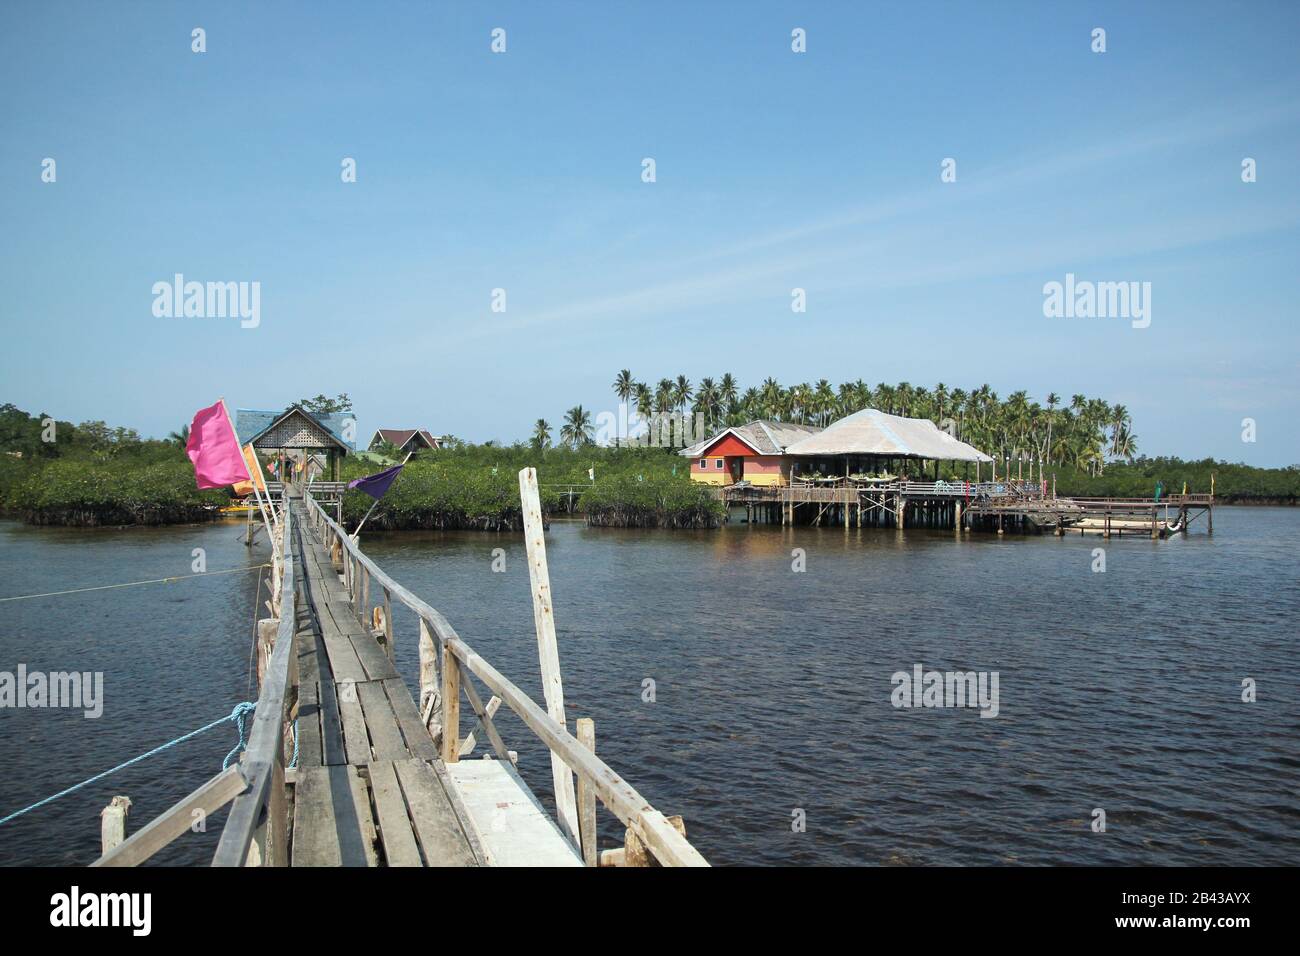 Wooden walkway with wooden cottages on stilts at Surigao del Sur, Philippines. Stock Photo